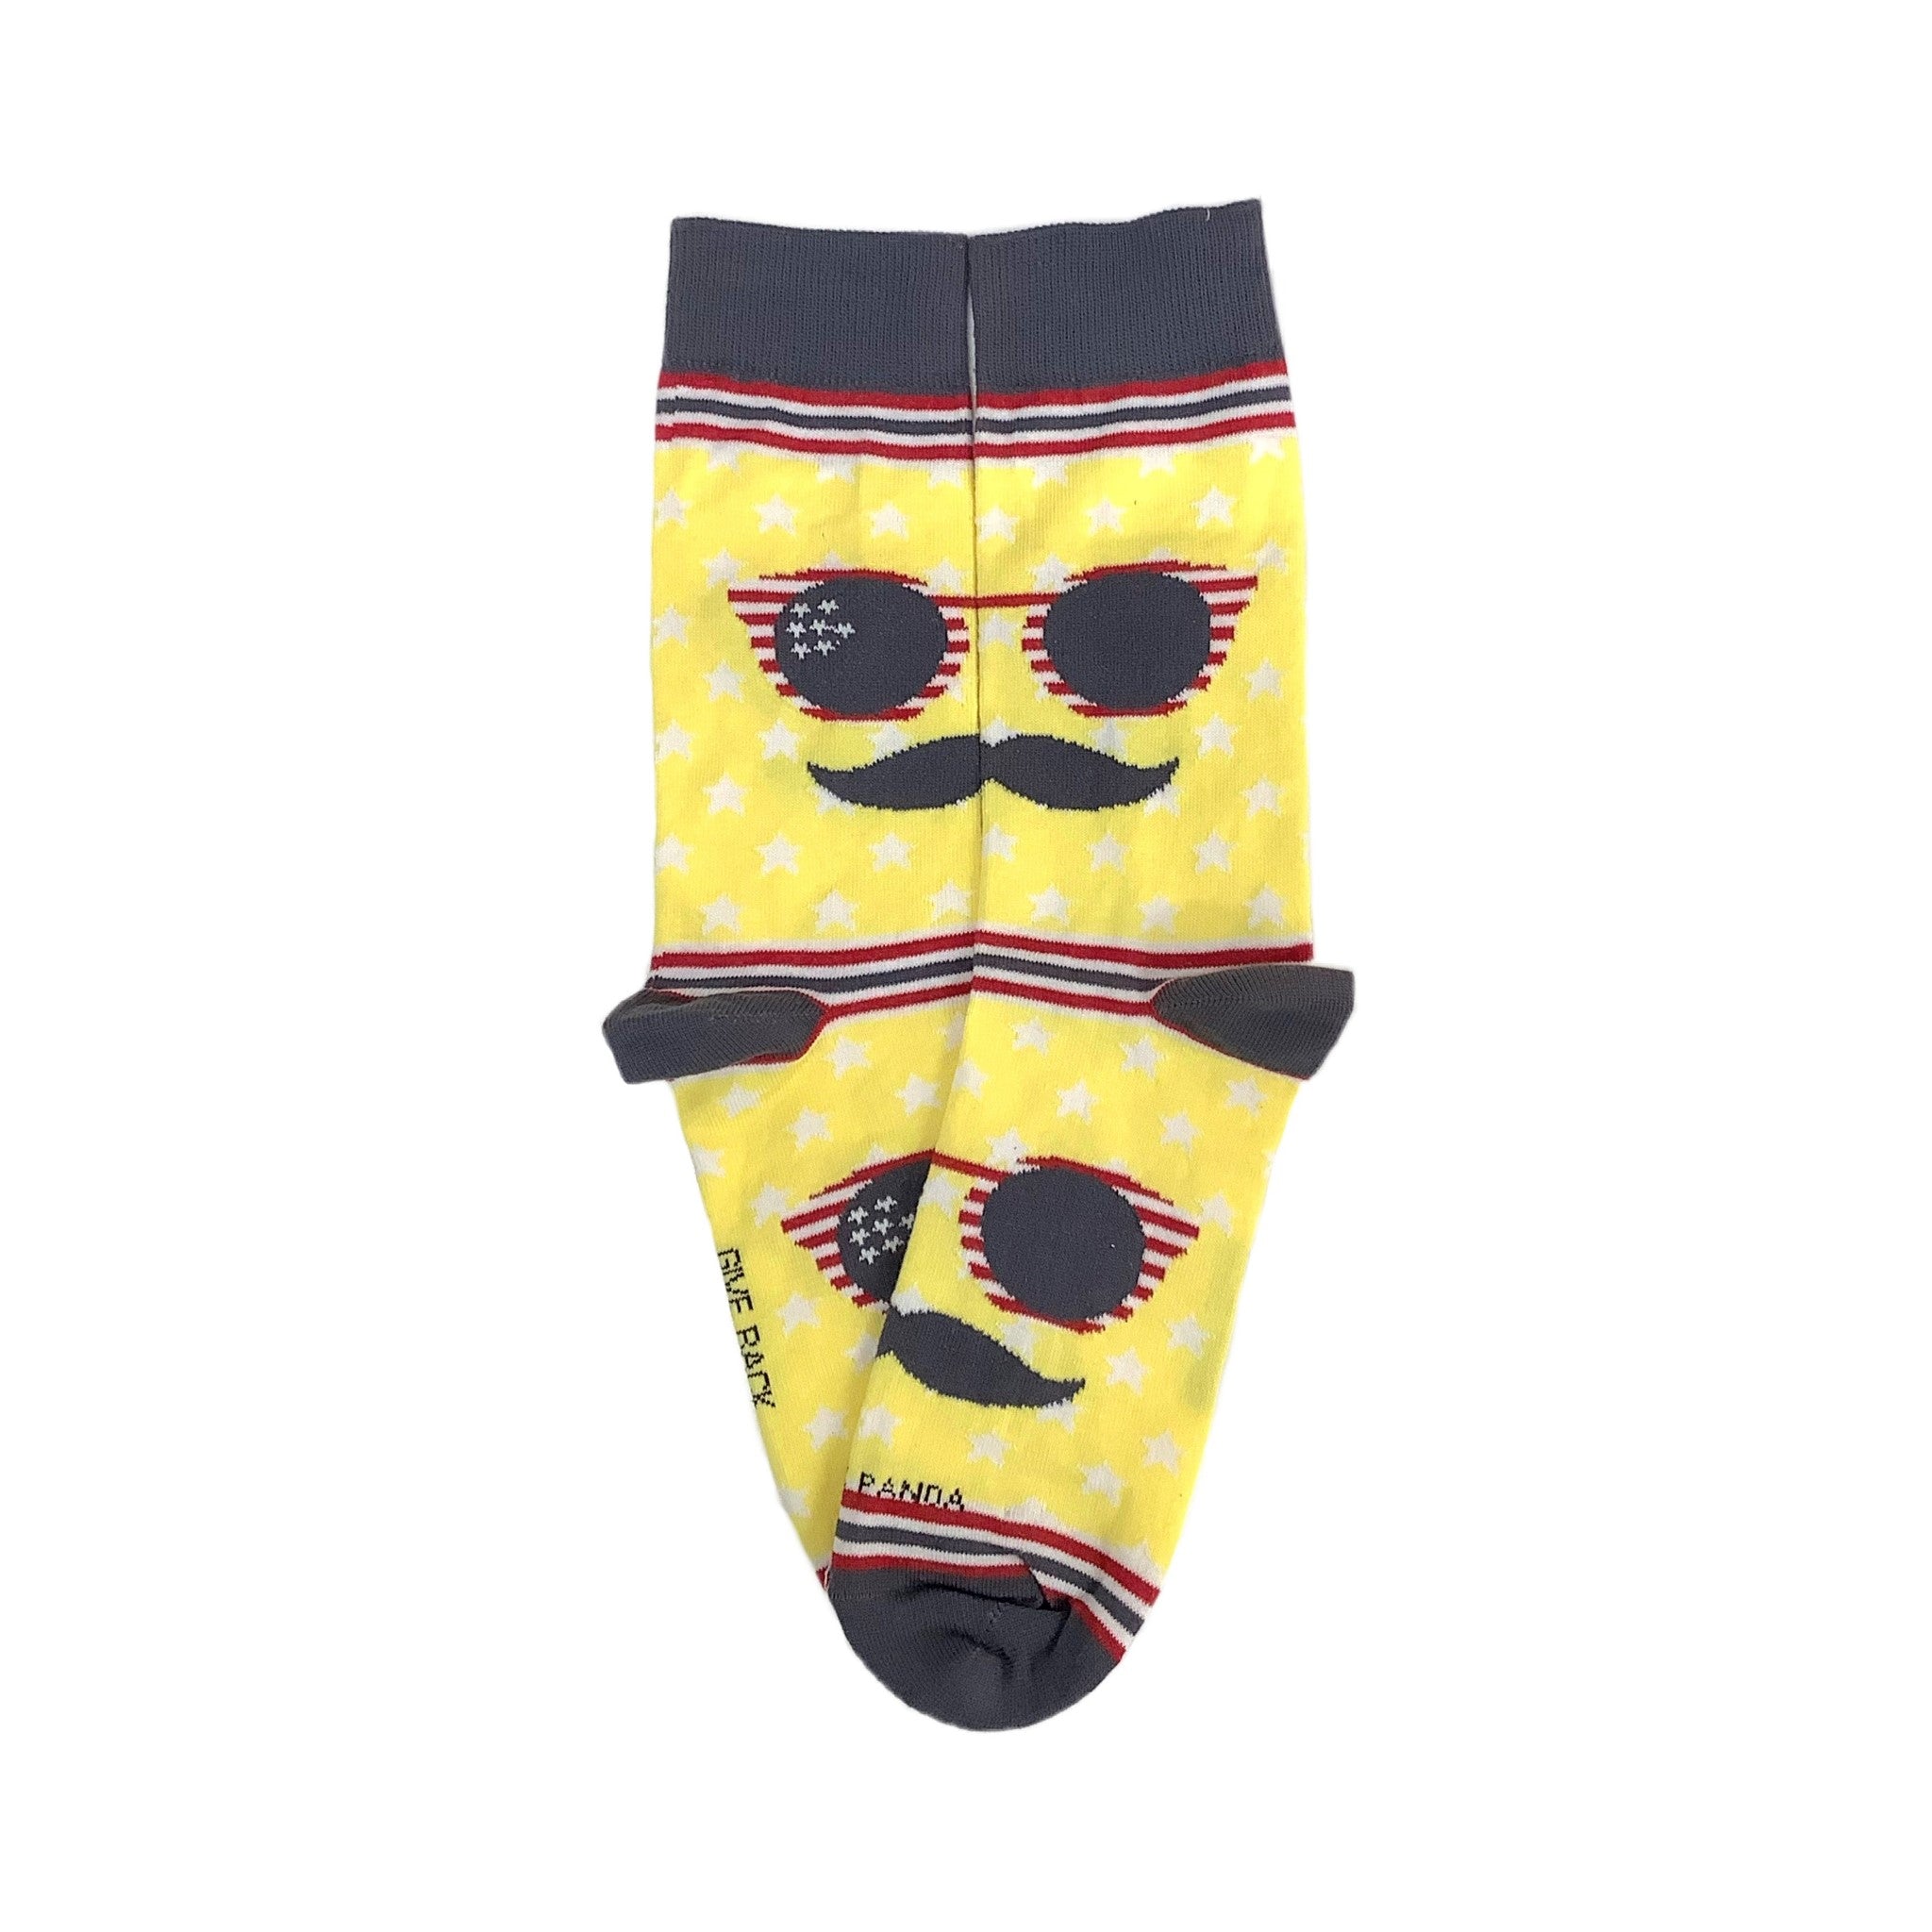 Mustache and Sunglasses Socks from the Sock Panda (Adult Large)